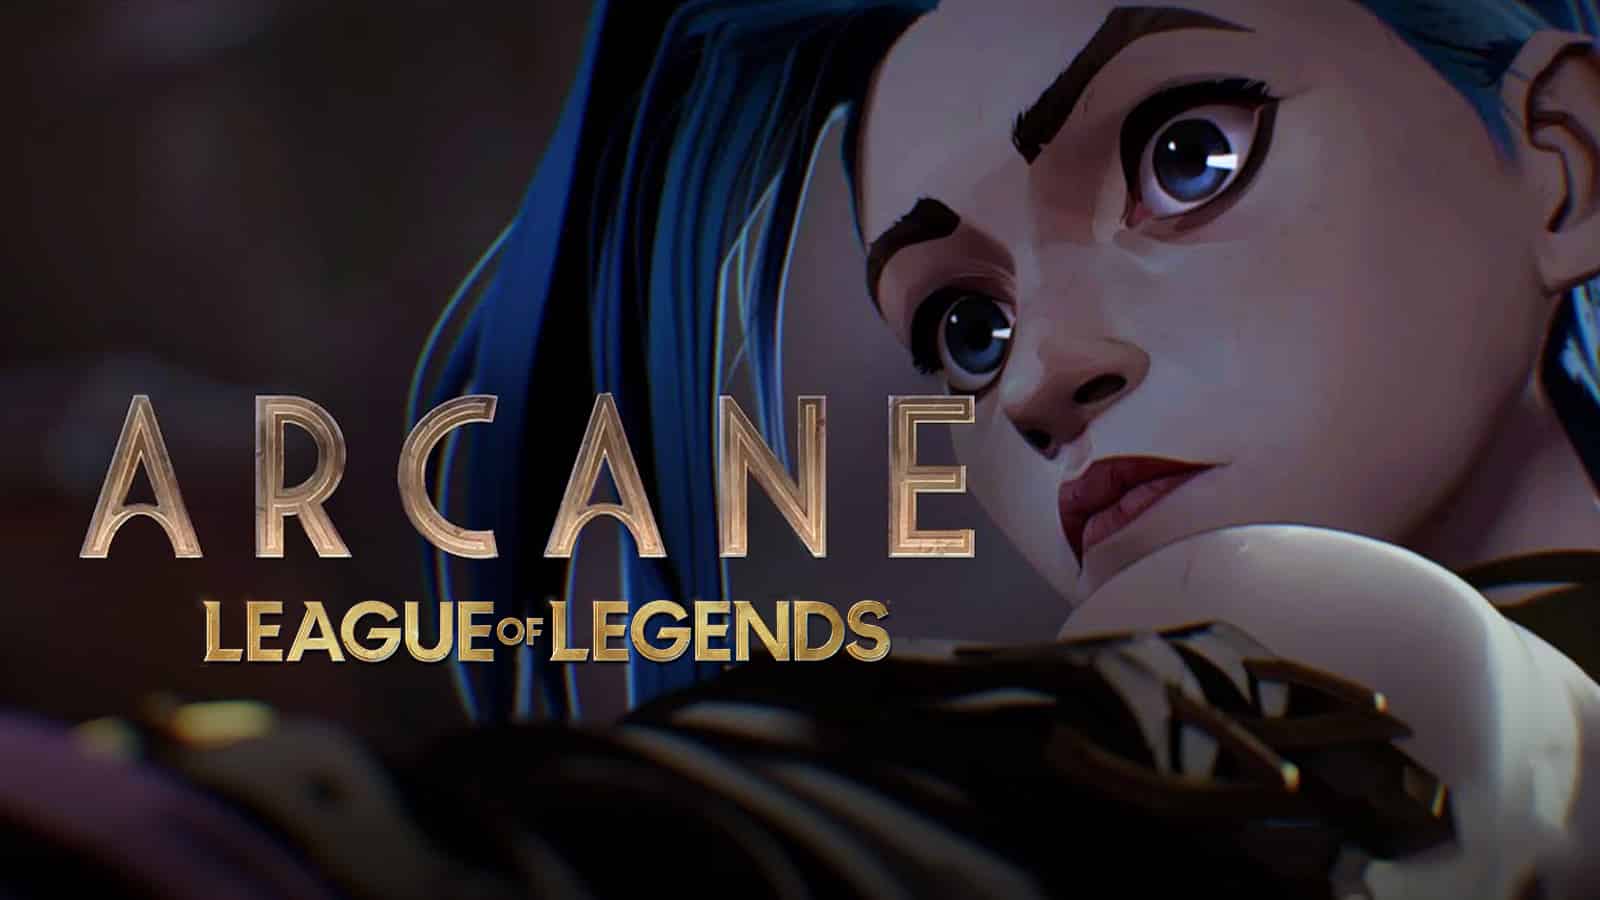 League of Legends anime Arcane coming to Netflix in 2021.